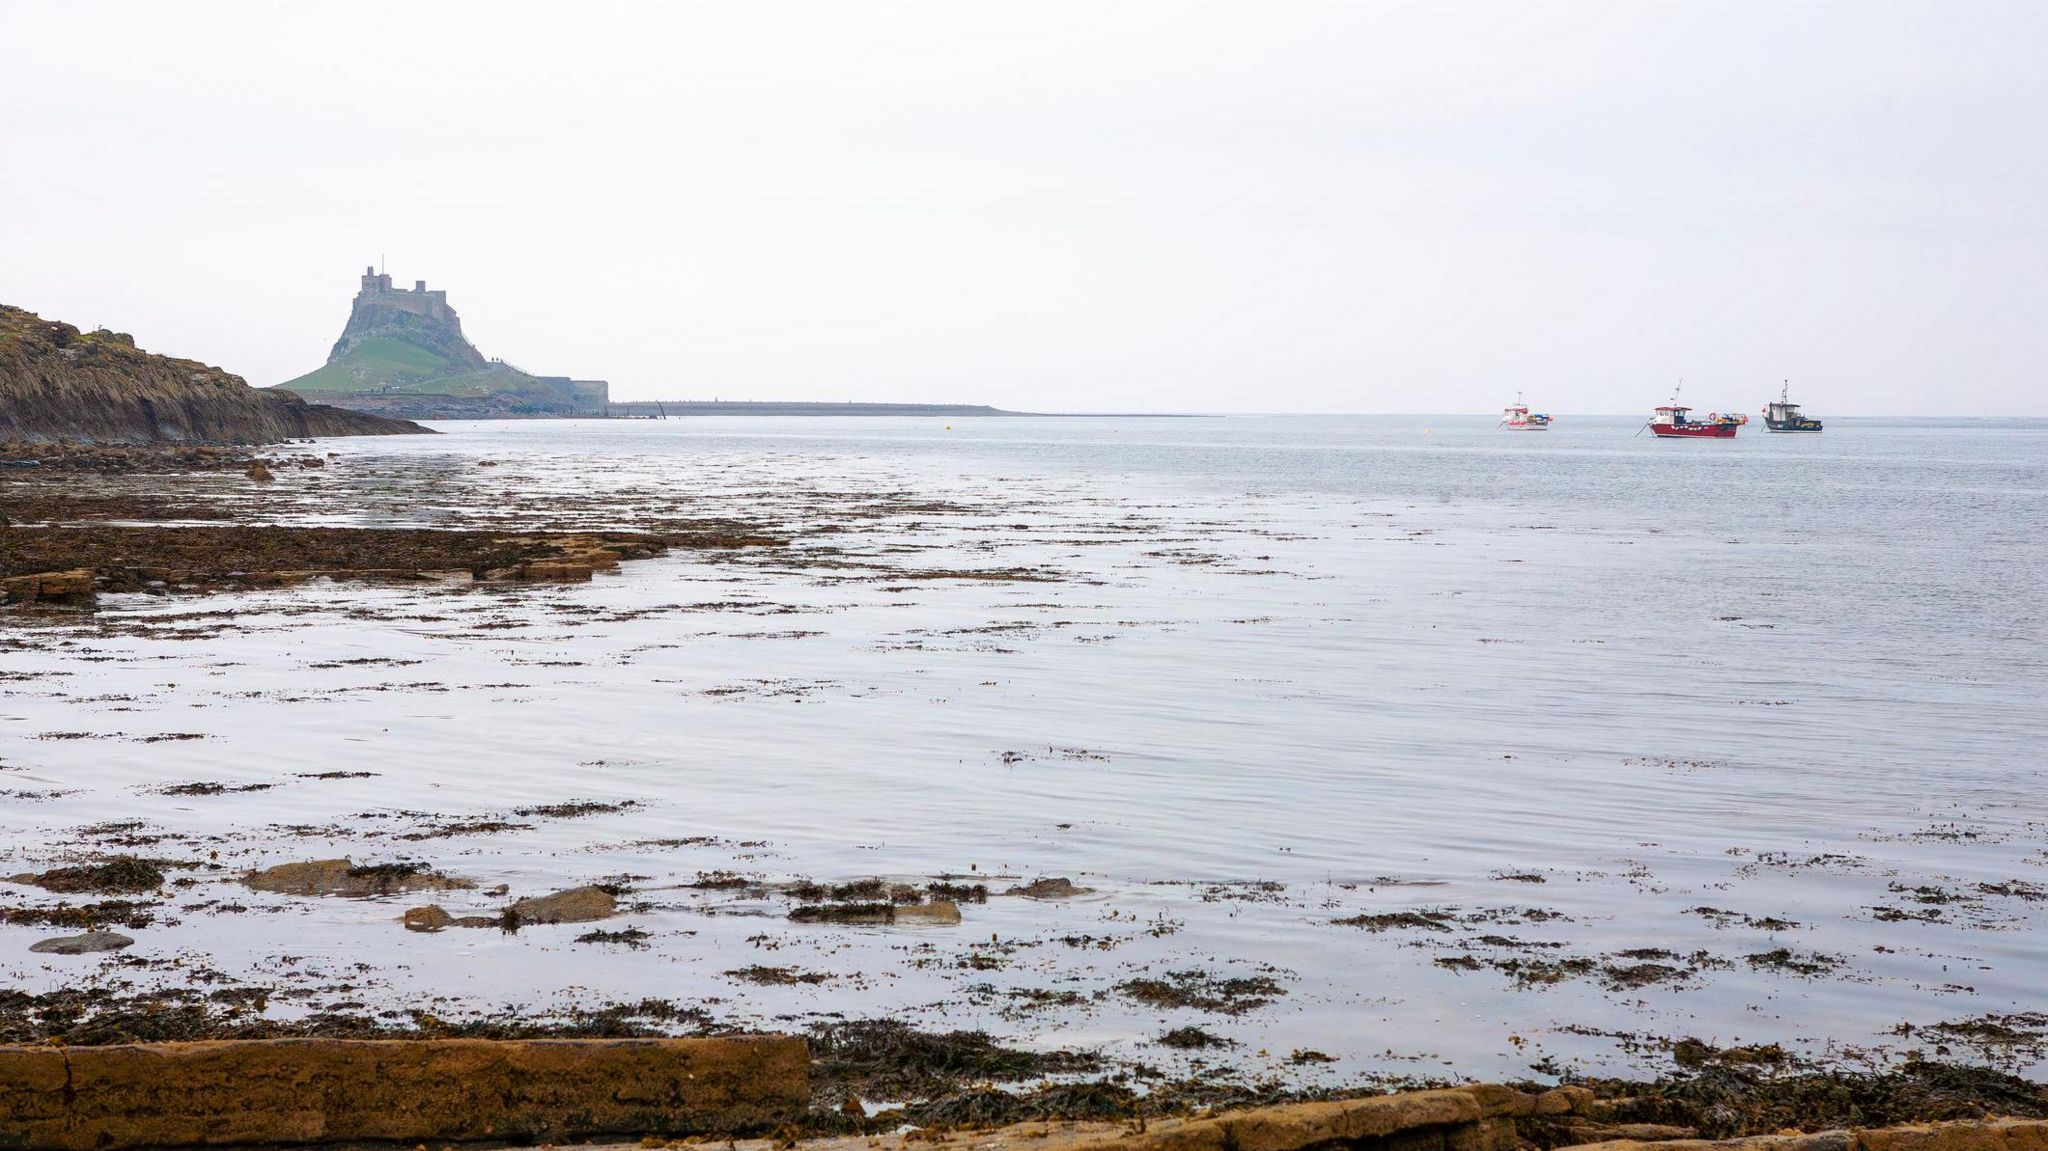 The castle and harbour from the Common, Lindisfarne